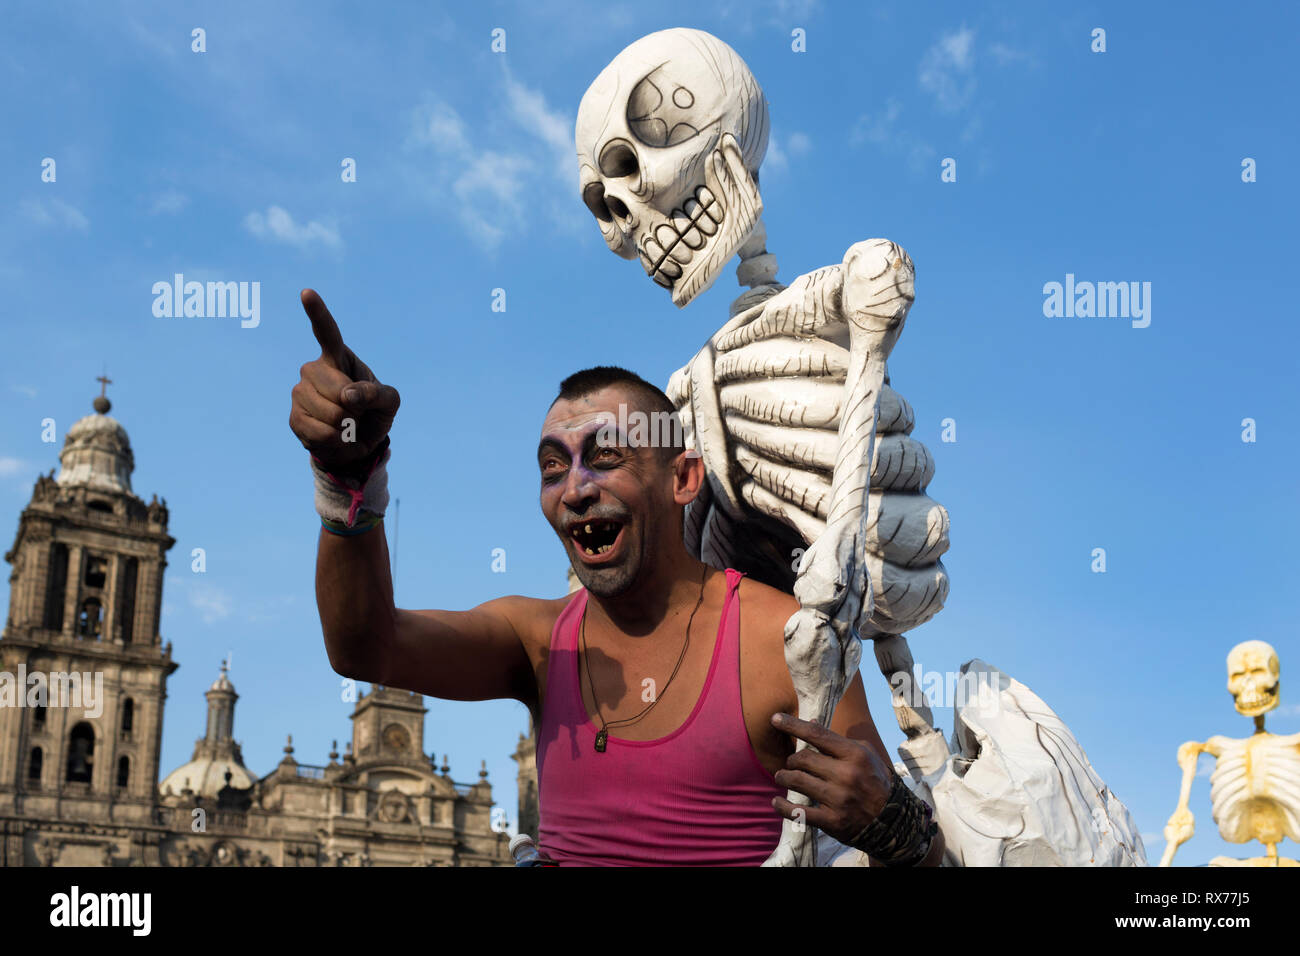 A man jokes with one of the skeletons that were part of a sculptural installation tribute to Jose Guadalupe Posadas, the creator of Catrina. Stock Photo